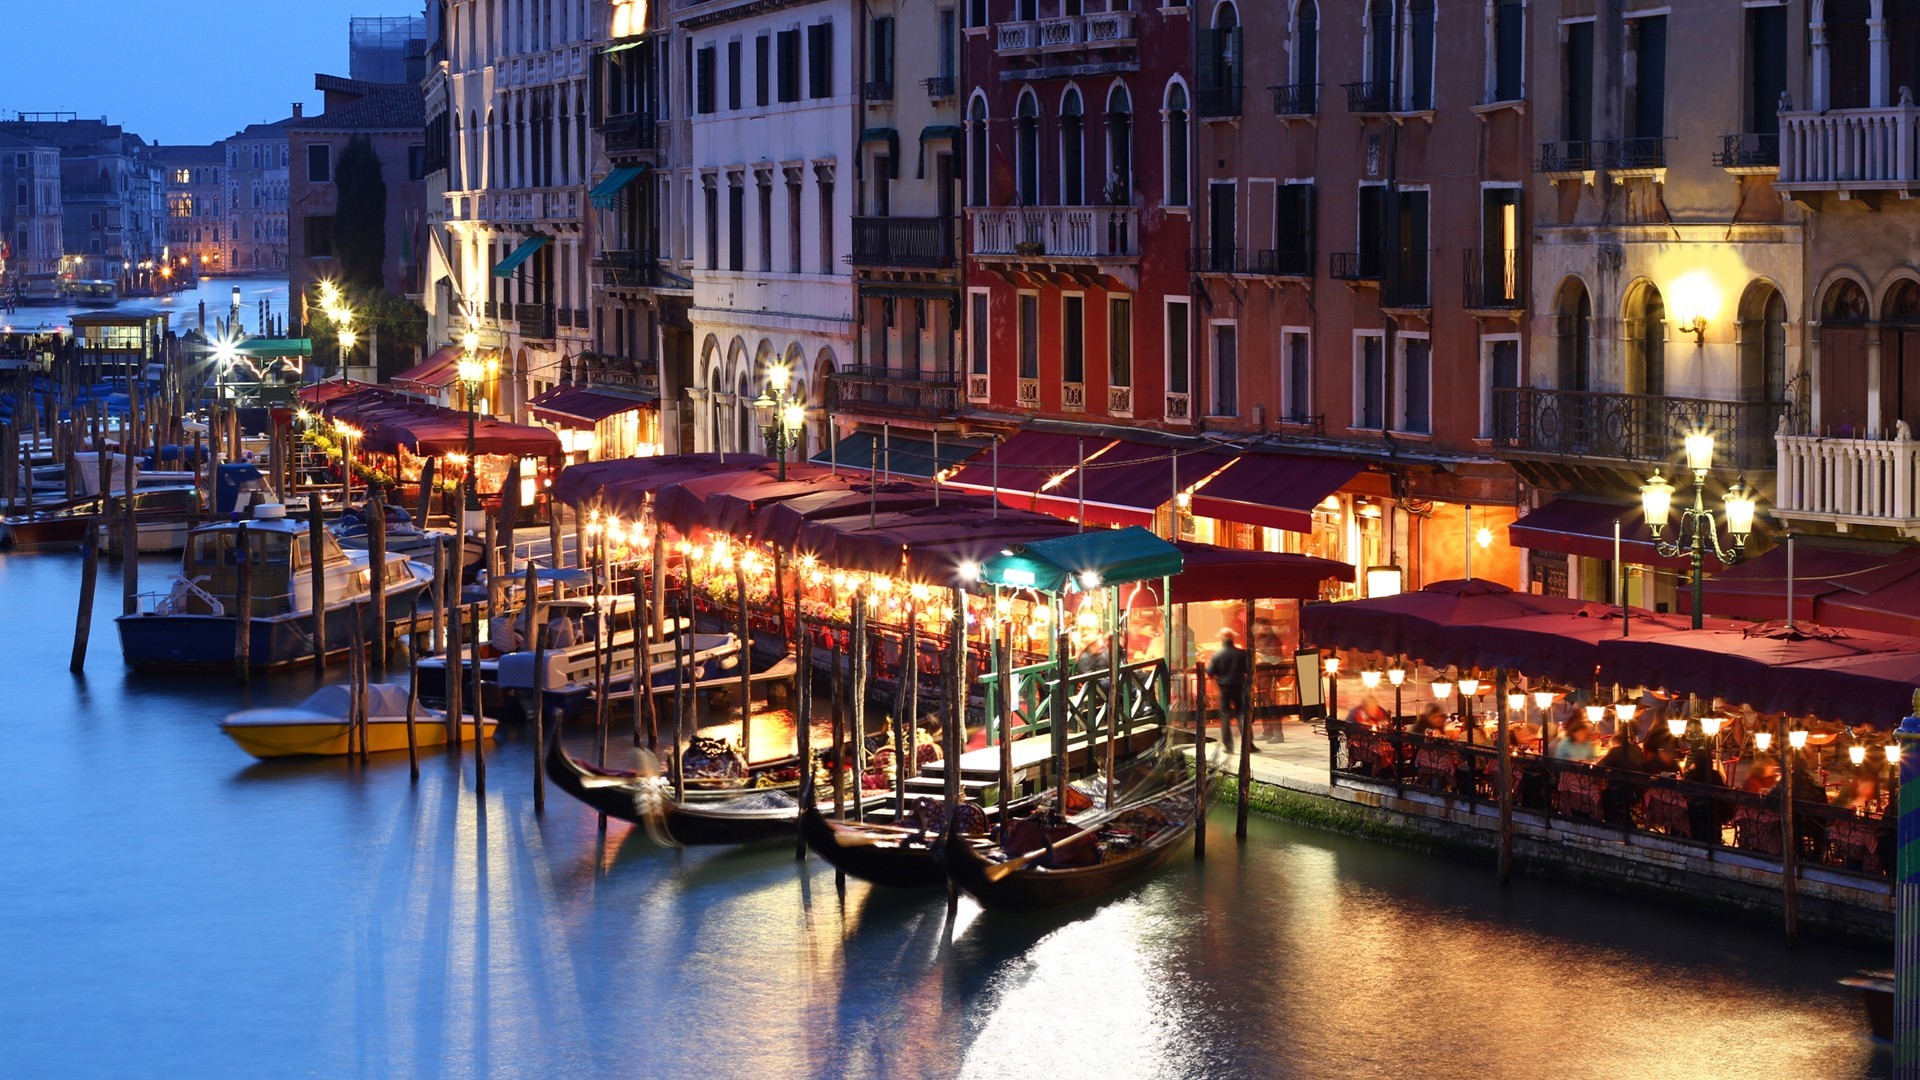 1920x1080 Download Wallpaper light water streets night venice grand italy canal cities  night city -2440-